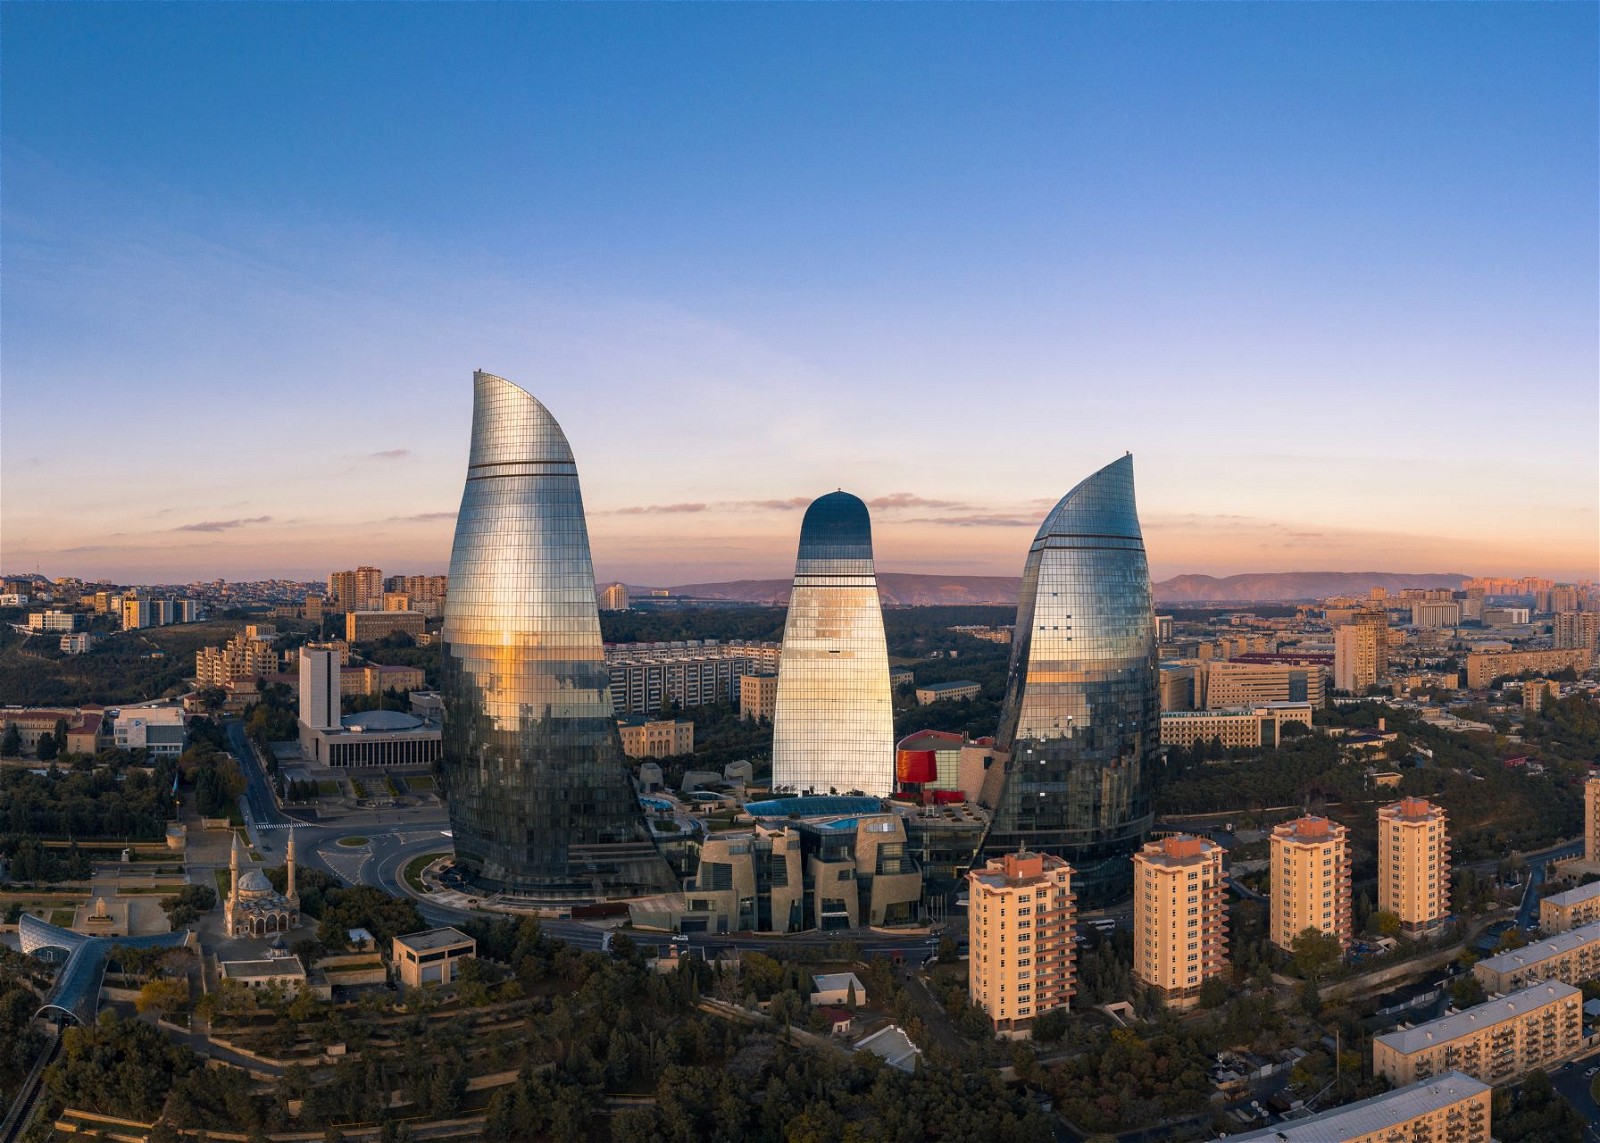 Baku is the capital of Azerbaijan, situated at the foothills of the Caucasus Mountains, and a magnificent city that is well worth exploring